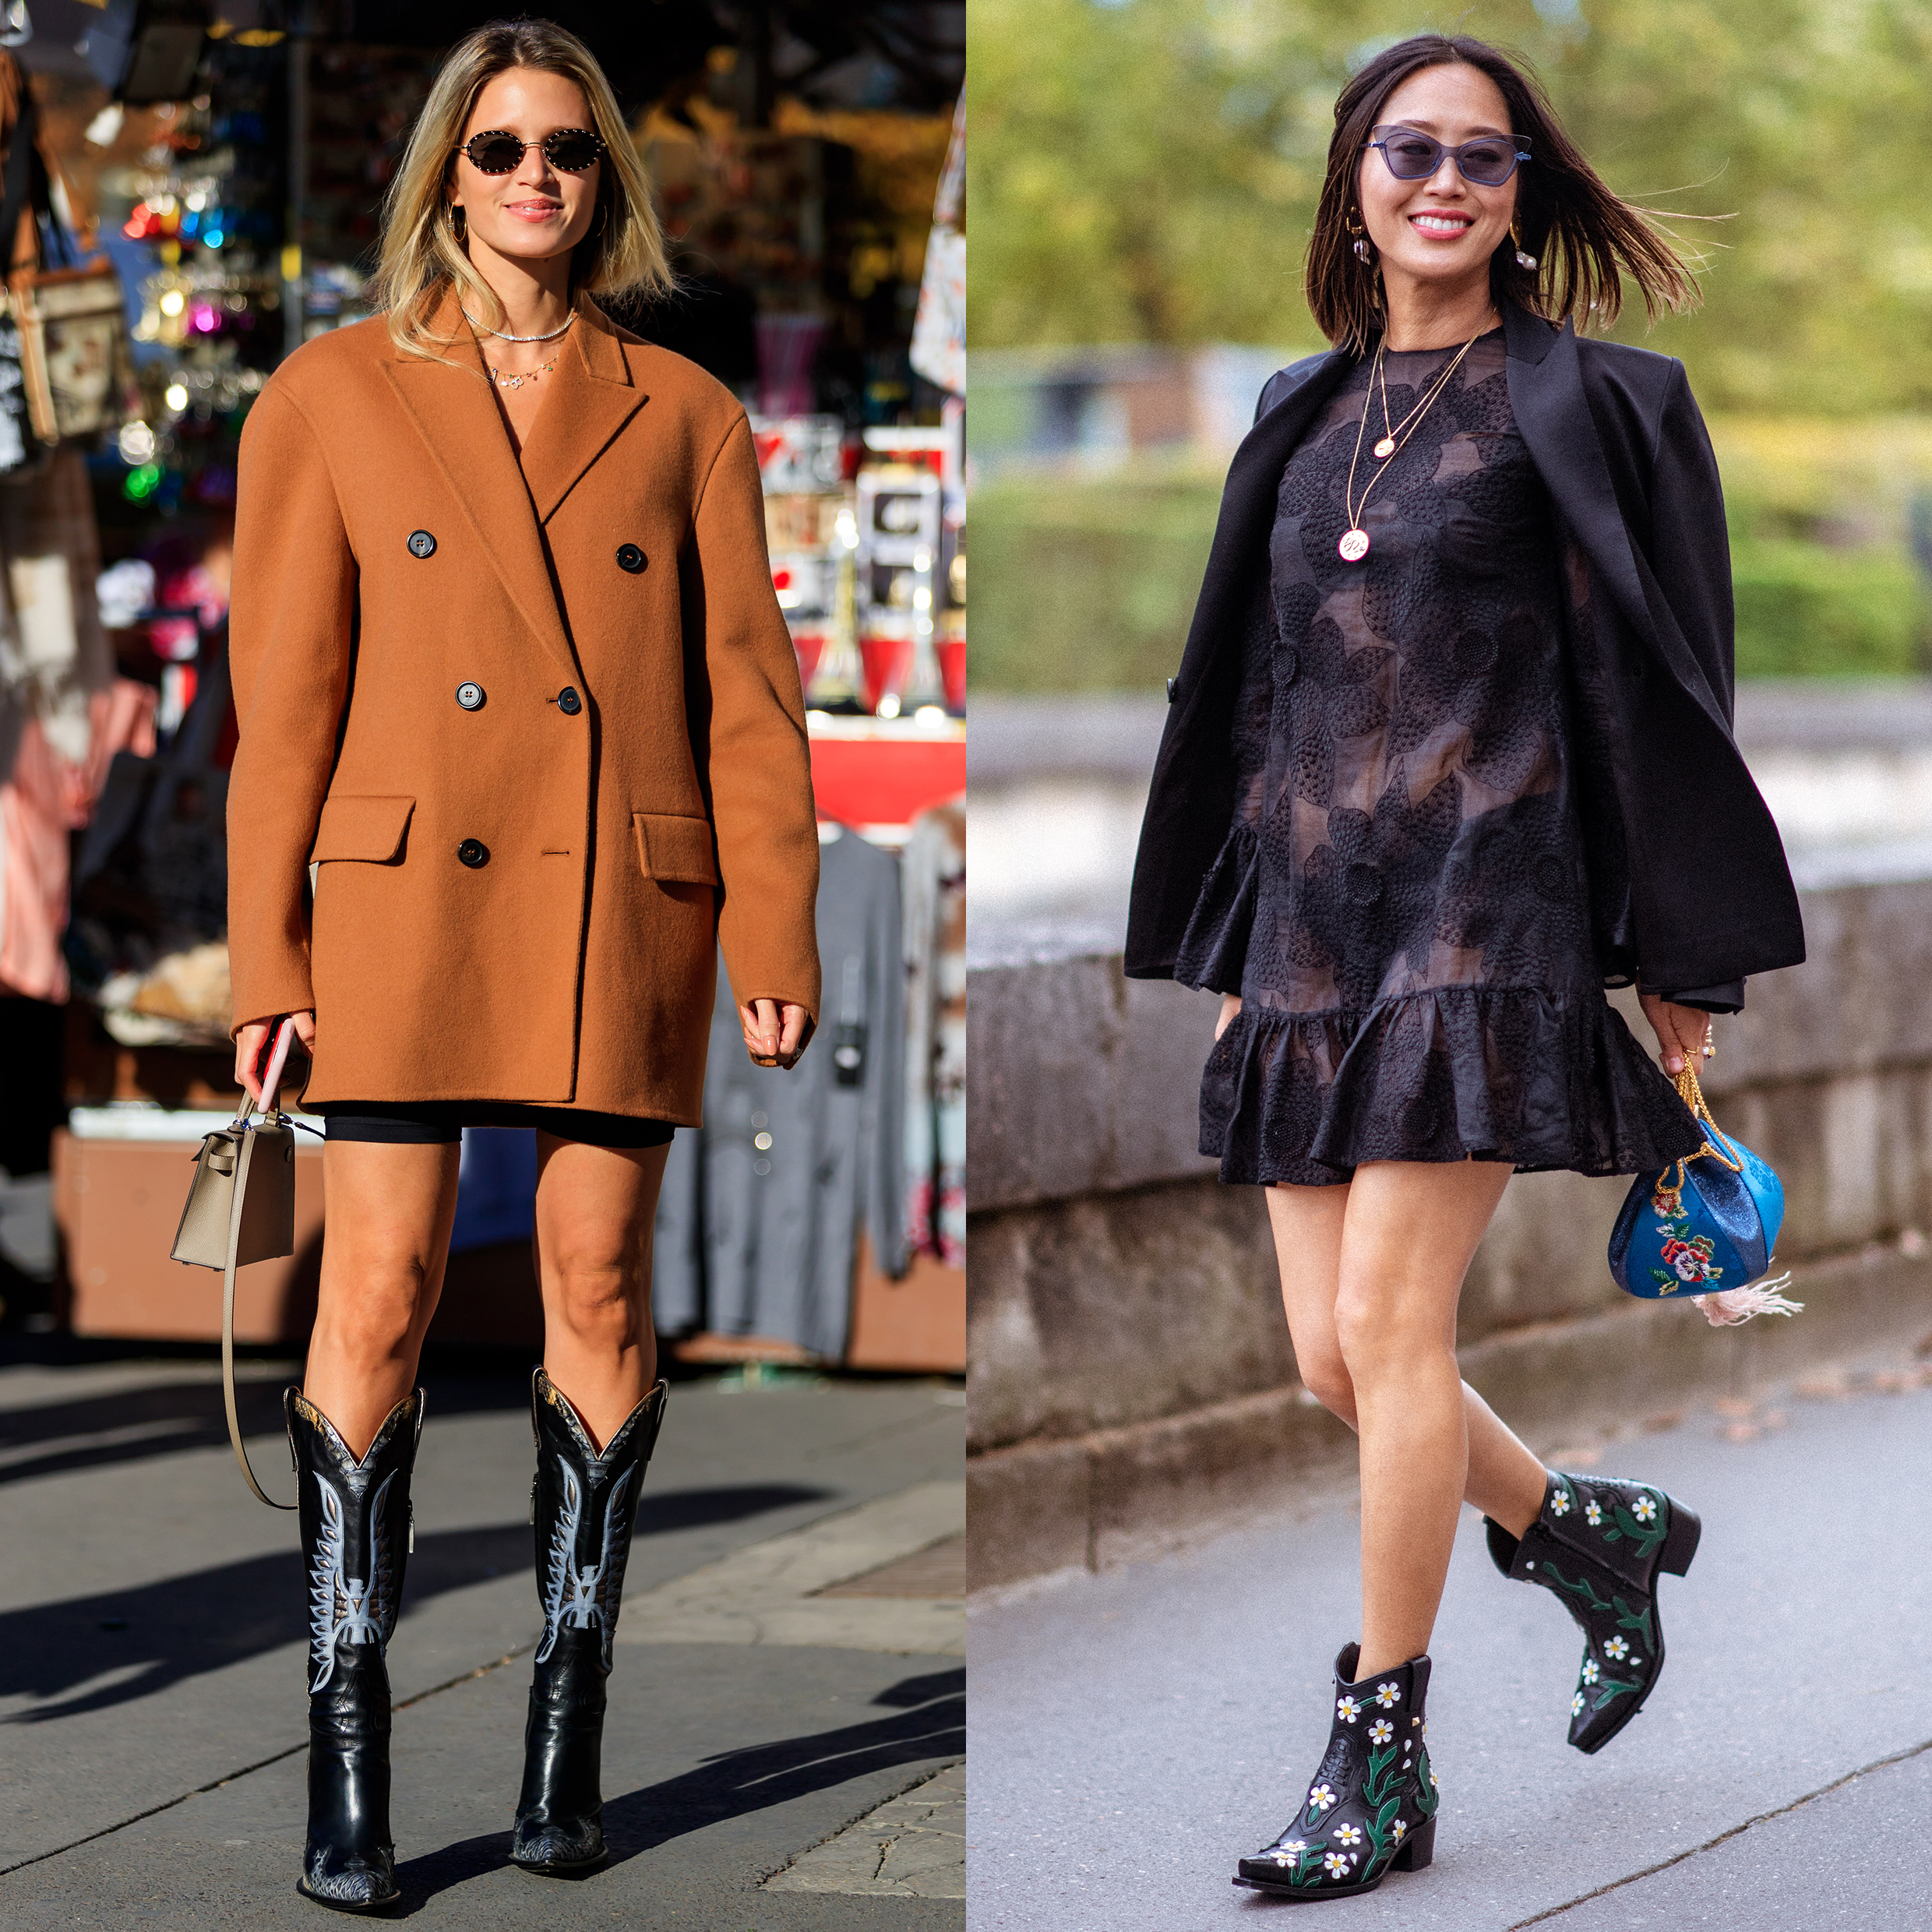 The 25 Best Women's Cowboy Boots to Giddy Up in and Wear All Fall Long